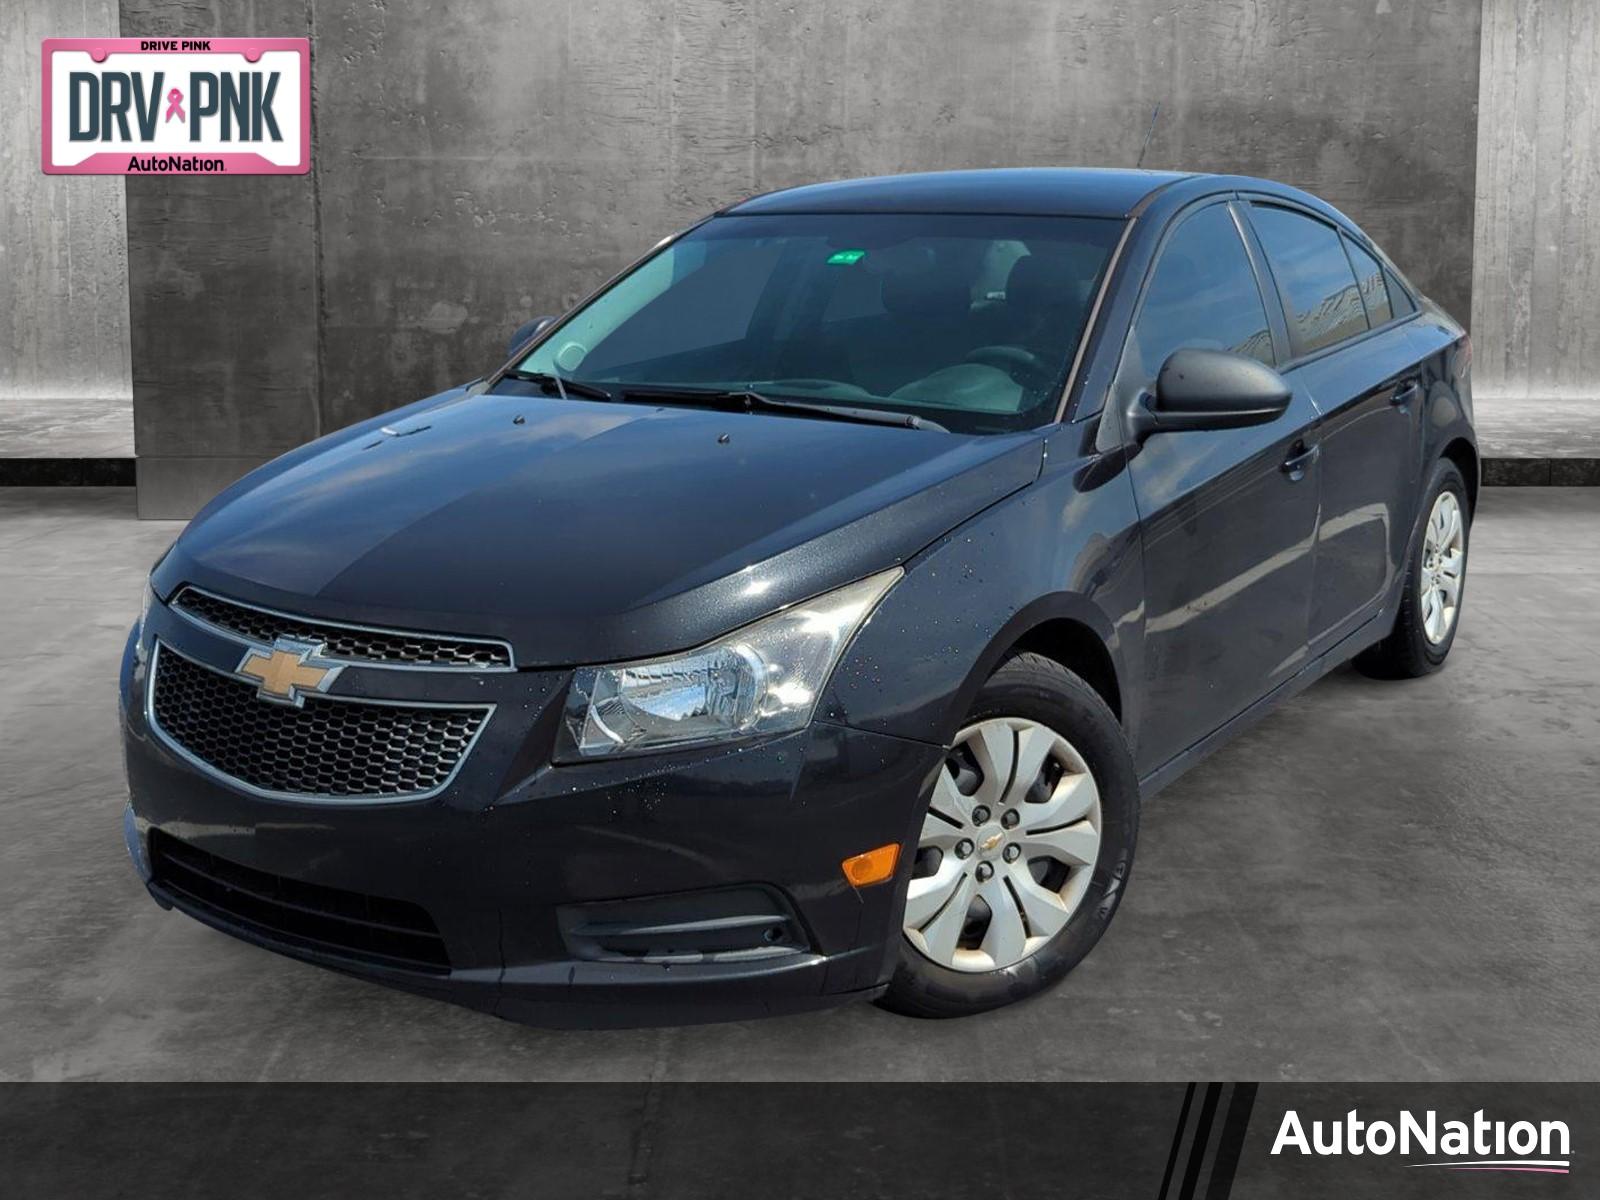 2014 Chevrolet Cruze Vehicle Photo in CLEARWATER, FL 33764-7163